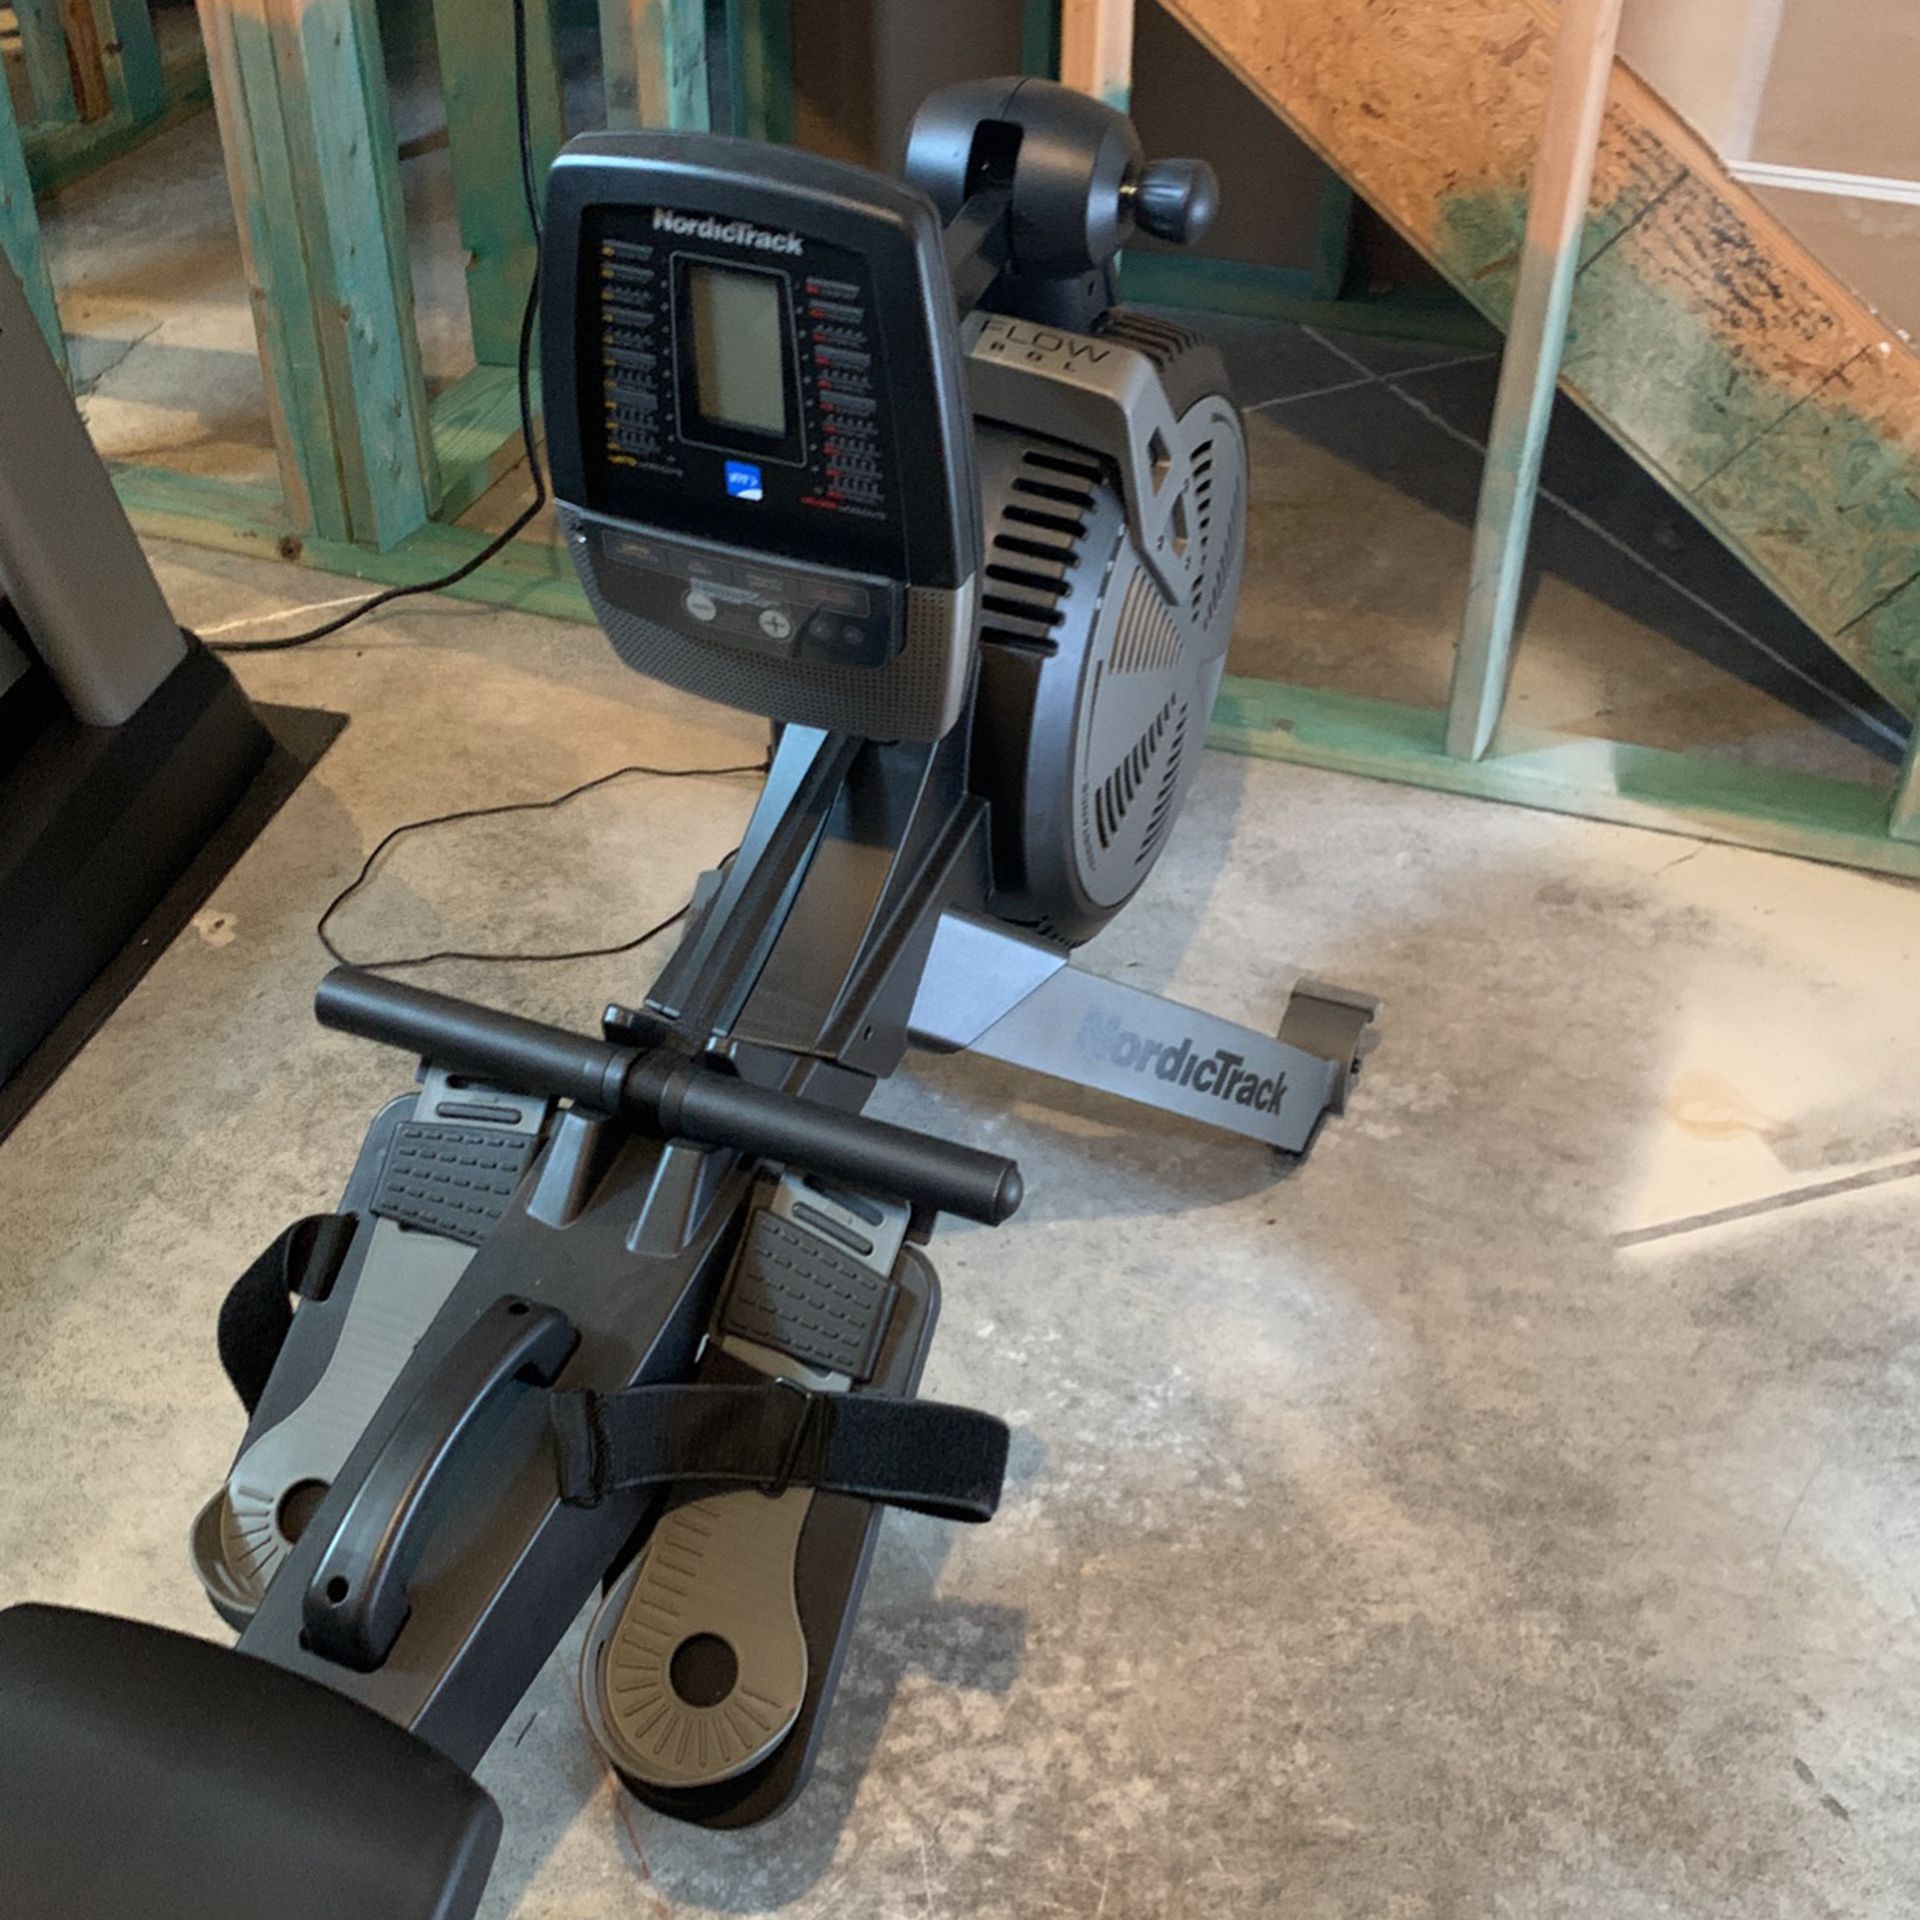 NordicTrack Rower For Sale